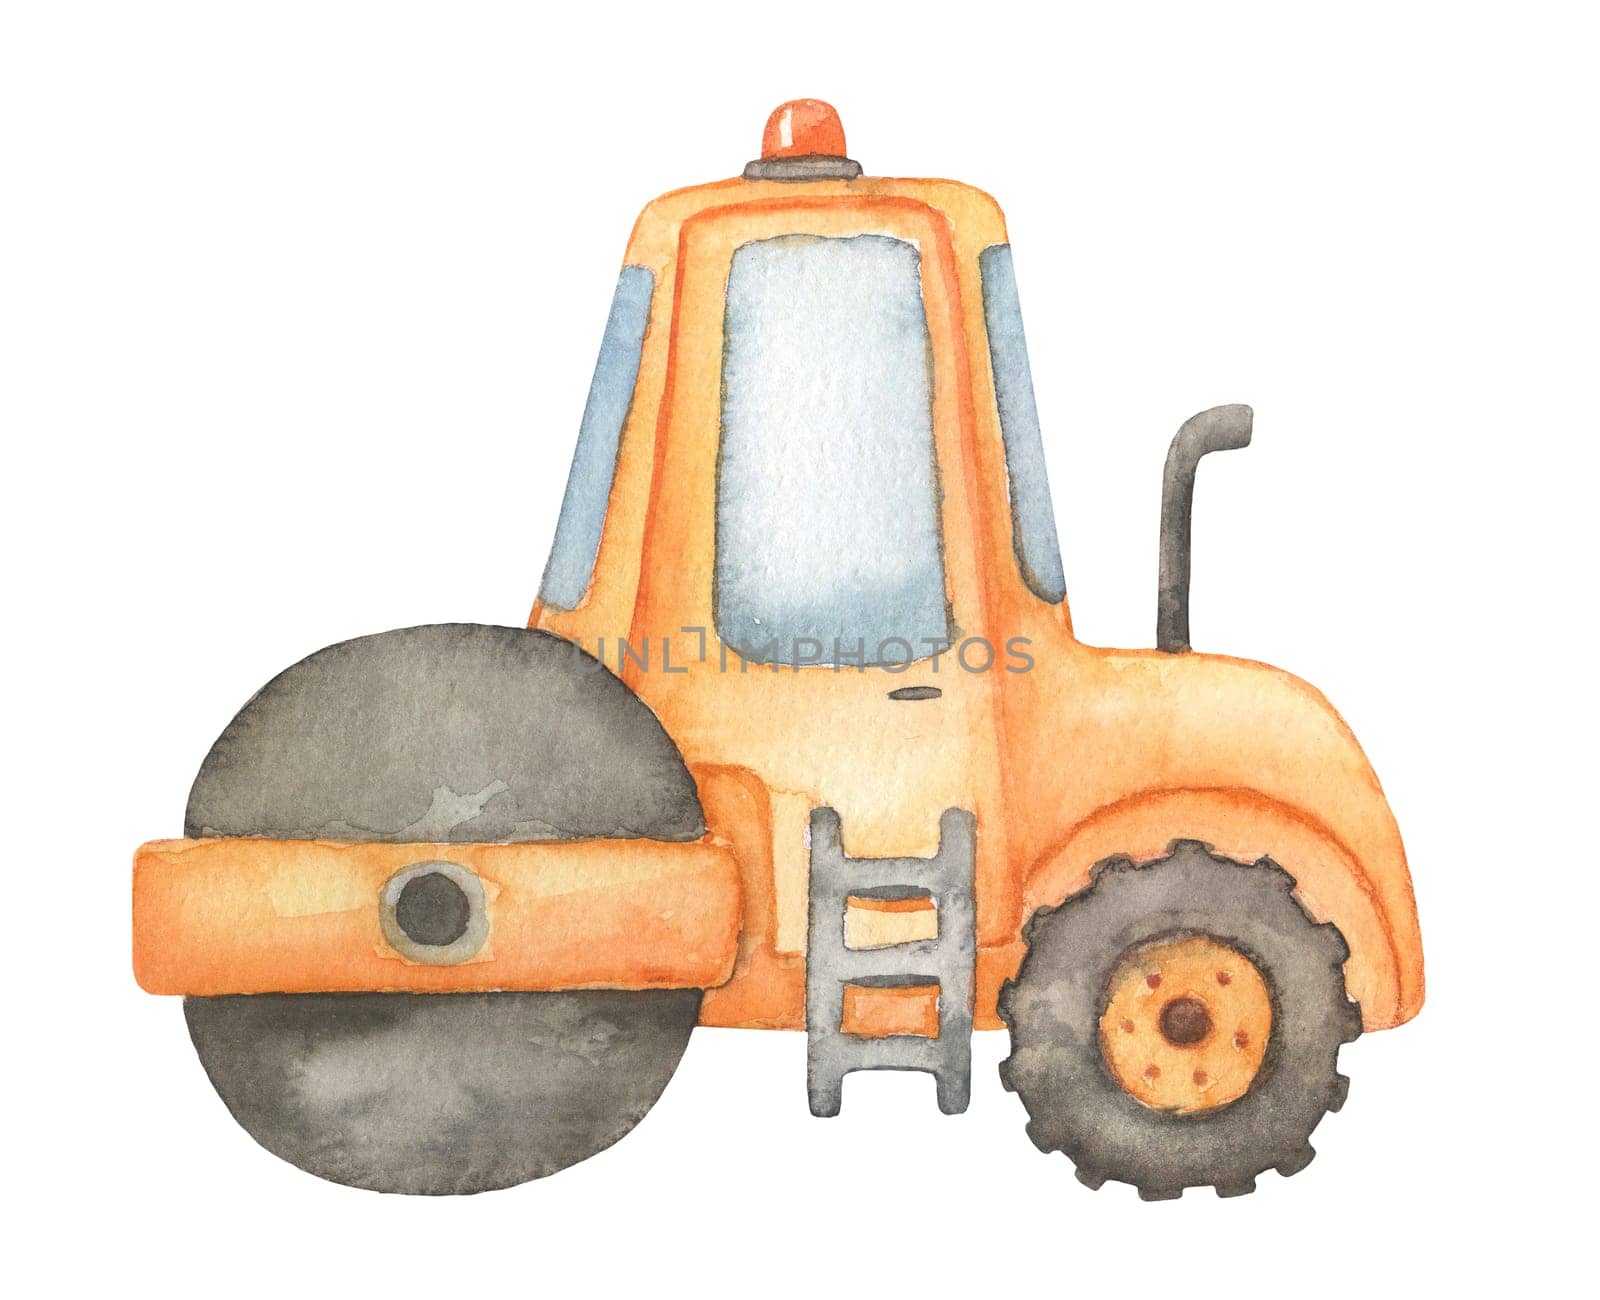 Construction road roller. Watercolor illustration isolated on white. Childish construction vehicle by ElenaPlatova